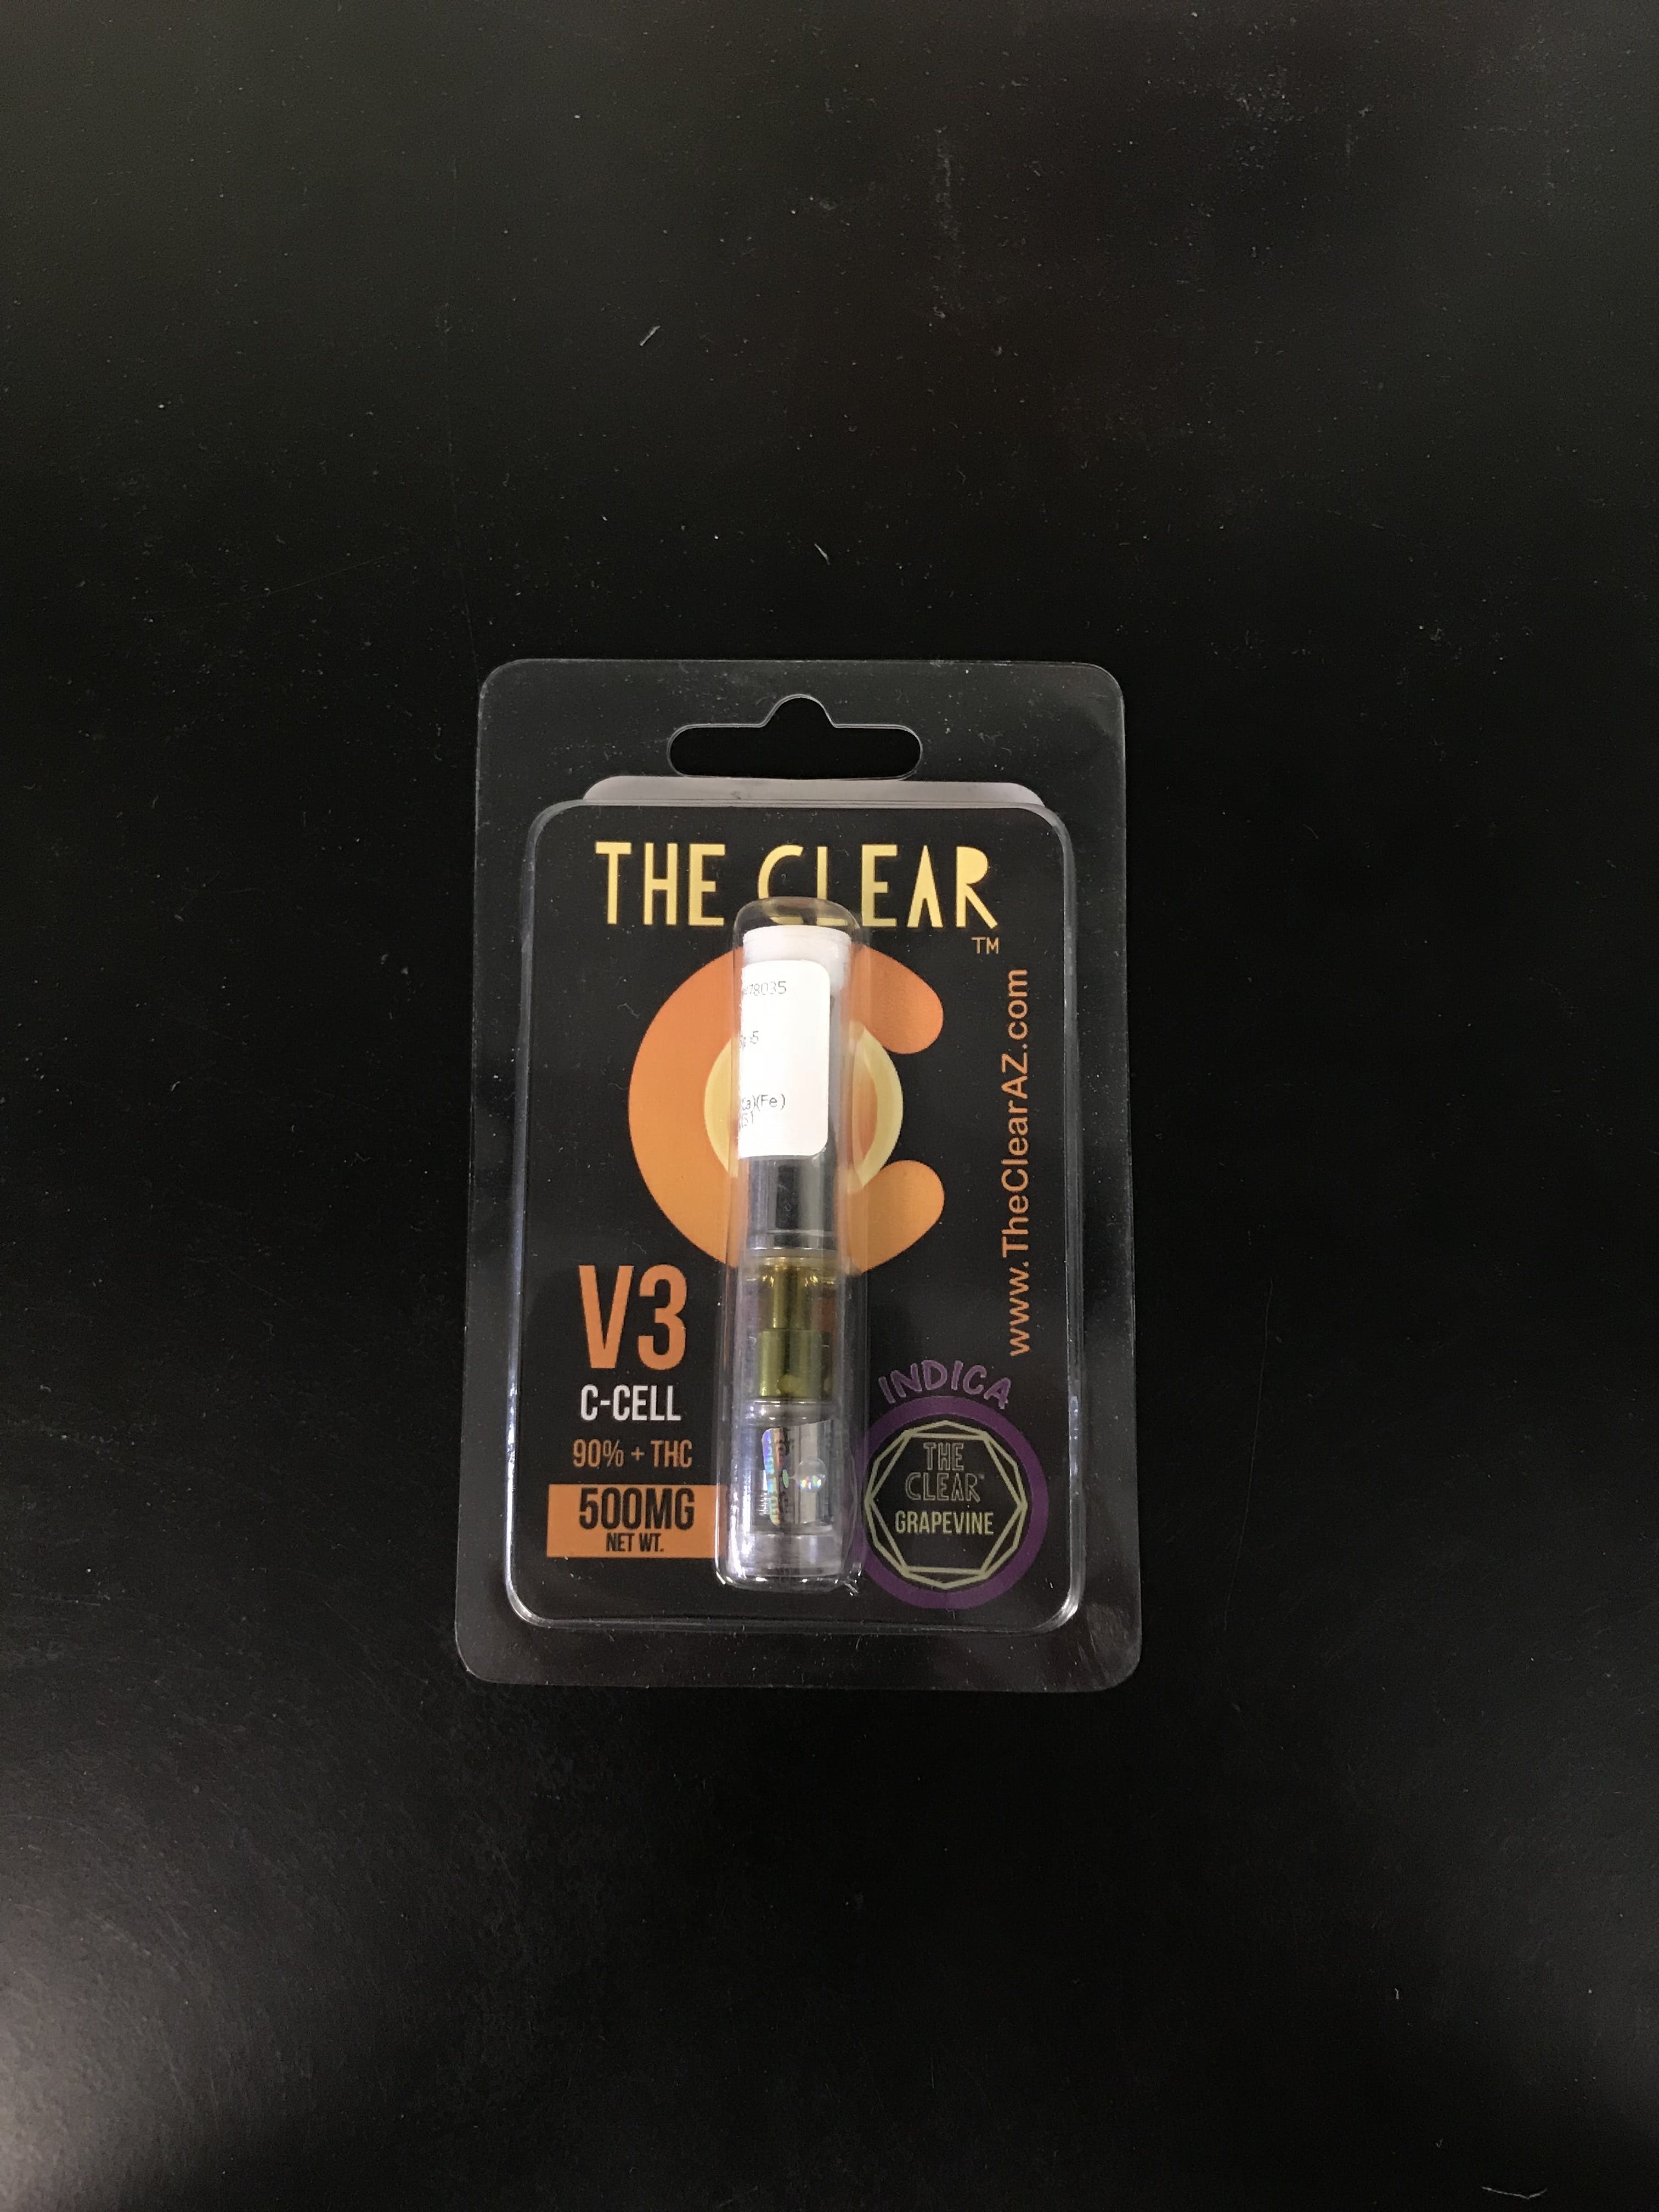 concentrate-the-clear-v3-grapevine-500mg-cartridge